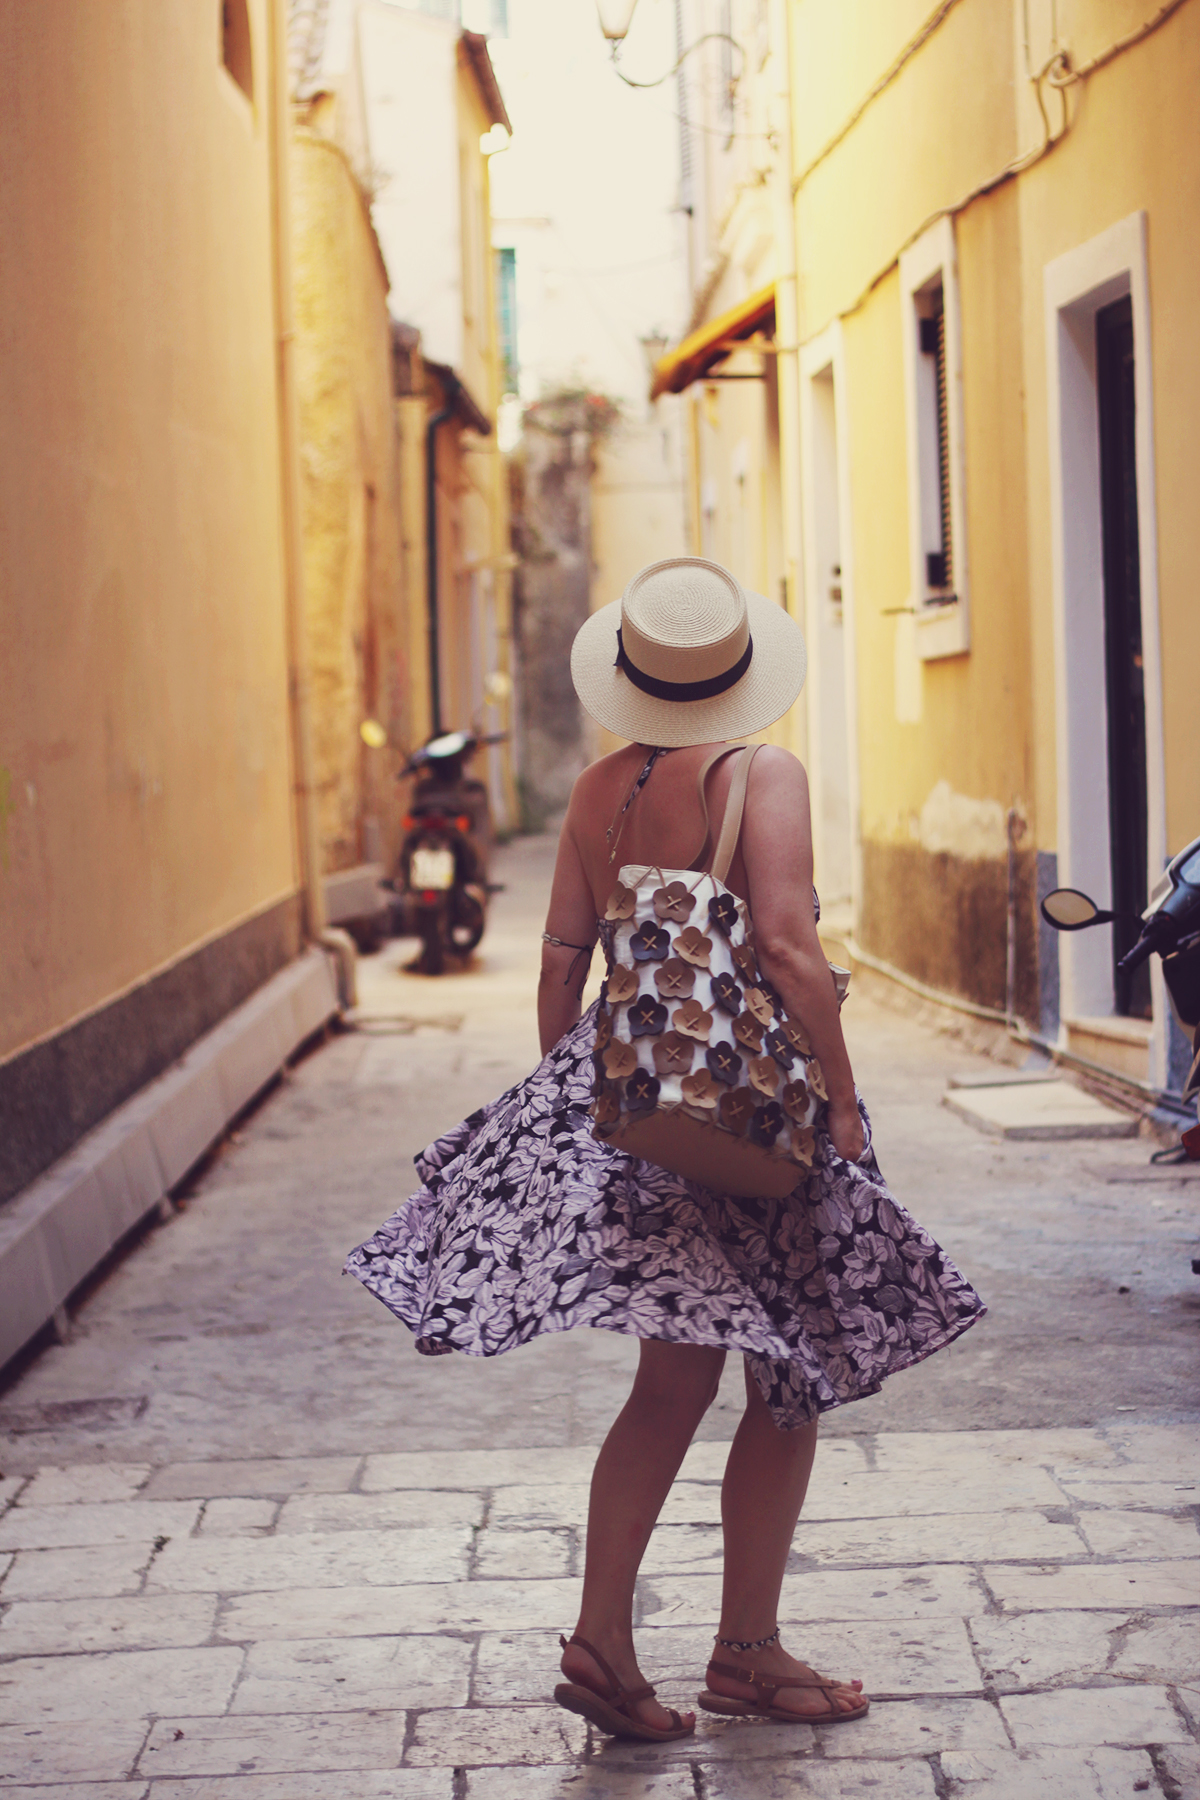 Corfu Town, travel post, travel style, Summer style, floral dress, flat sandals, Nine West floral bag, straw hat